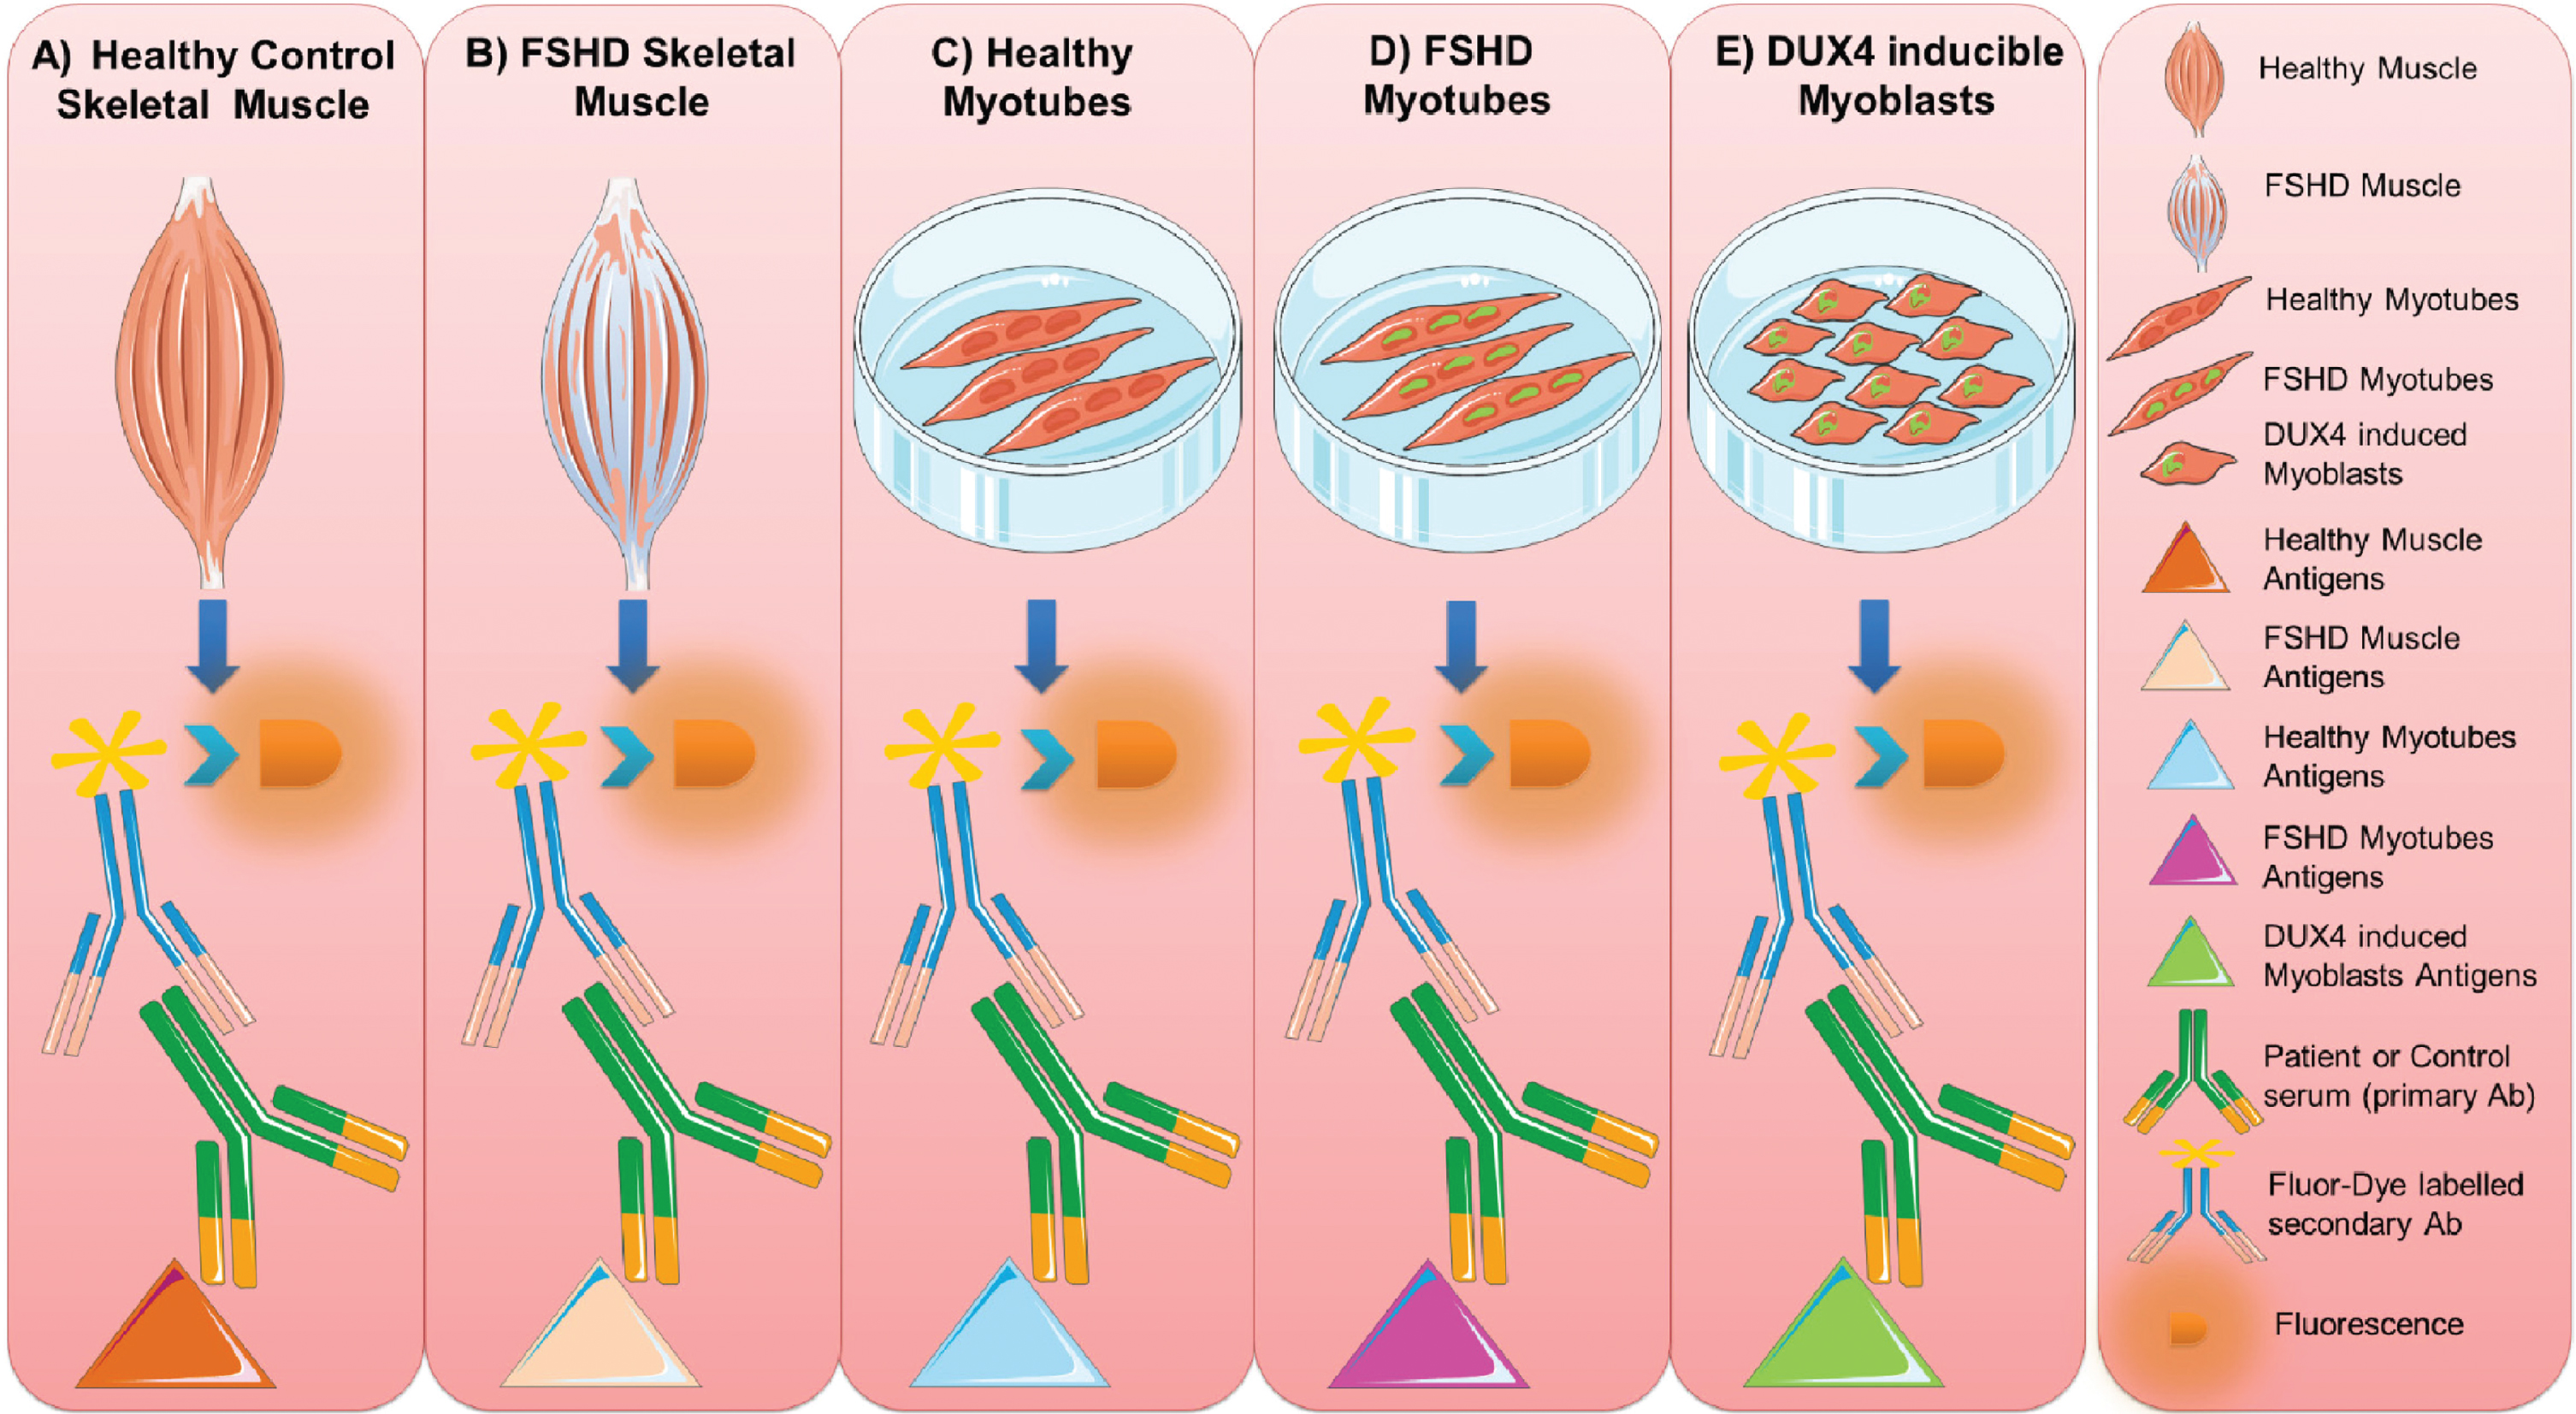 Muscle antigen preparations. Protein extracts were prepared from healthy control (A) and FSHD (B) skeletal muscle biopsies, from cultured healthy (C) and FSHD myotubes (D) and from DUX4-expressing myoblasts (E). The reactivity of FSHD and HC sera with each of these extracts was analyzed by immunoblotting. This figure was created adapting Servier Medical Art templates. Original images are licensed under a Creative Commons Attribution 3.0 Unported License.